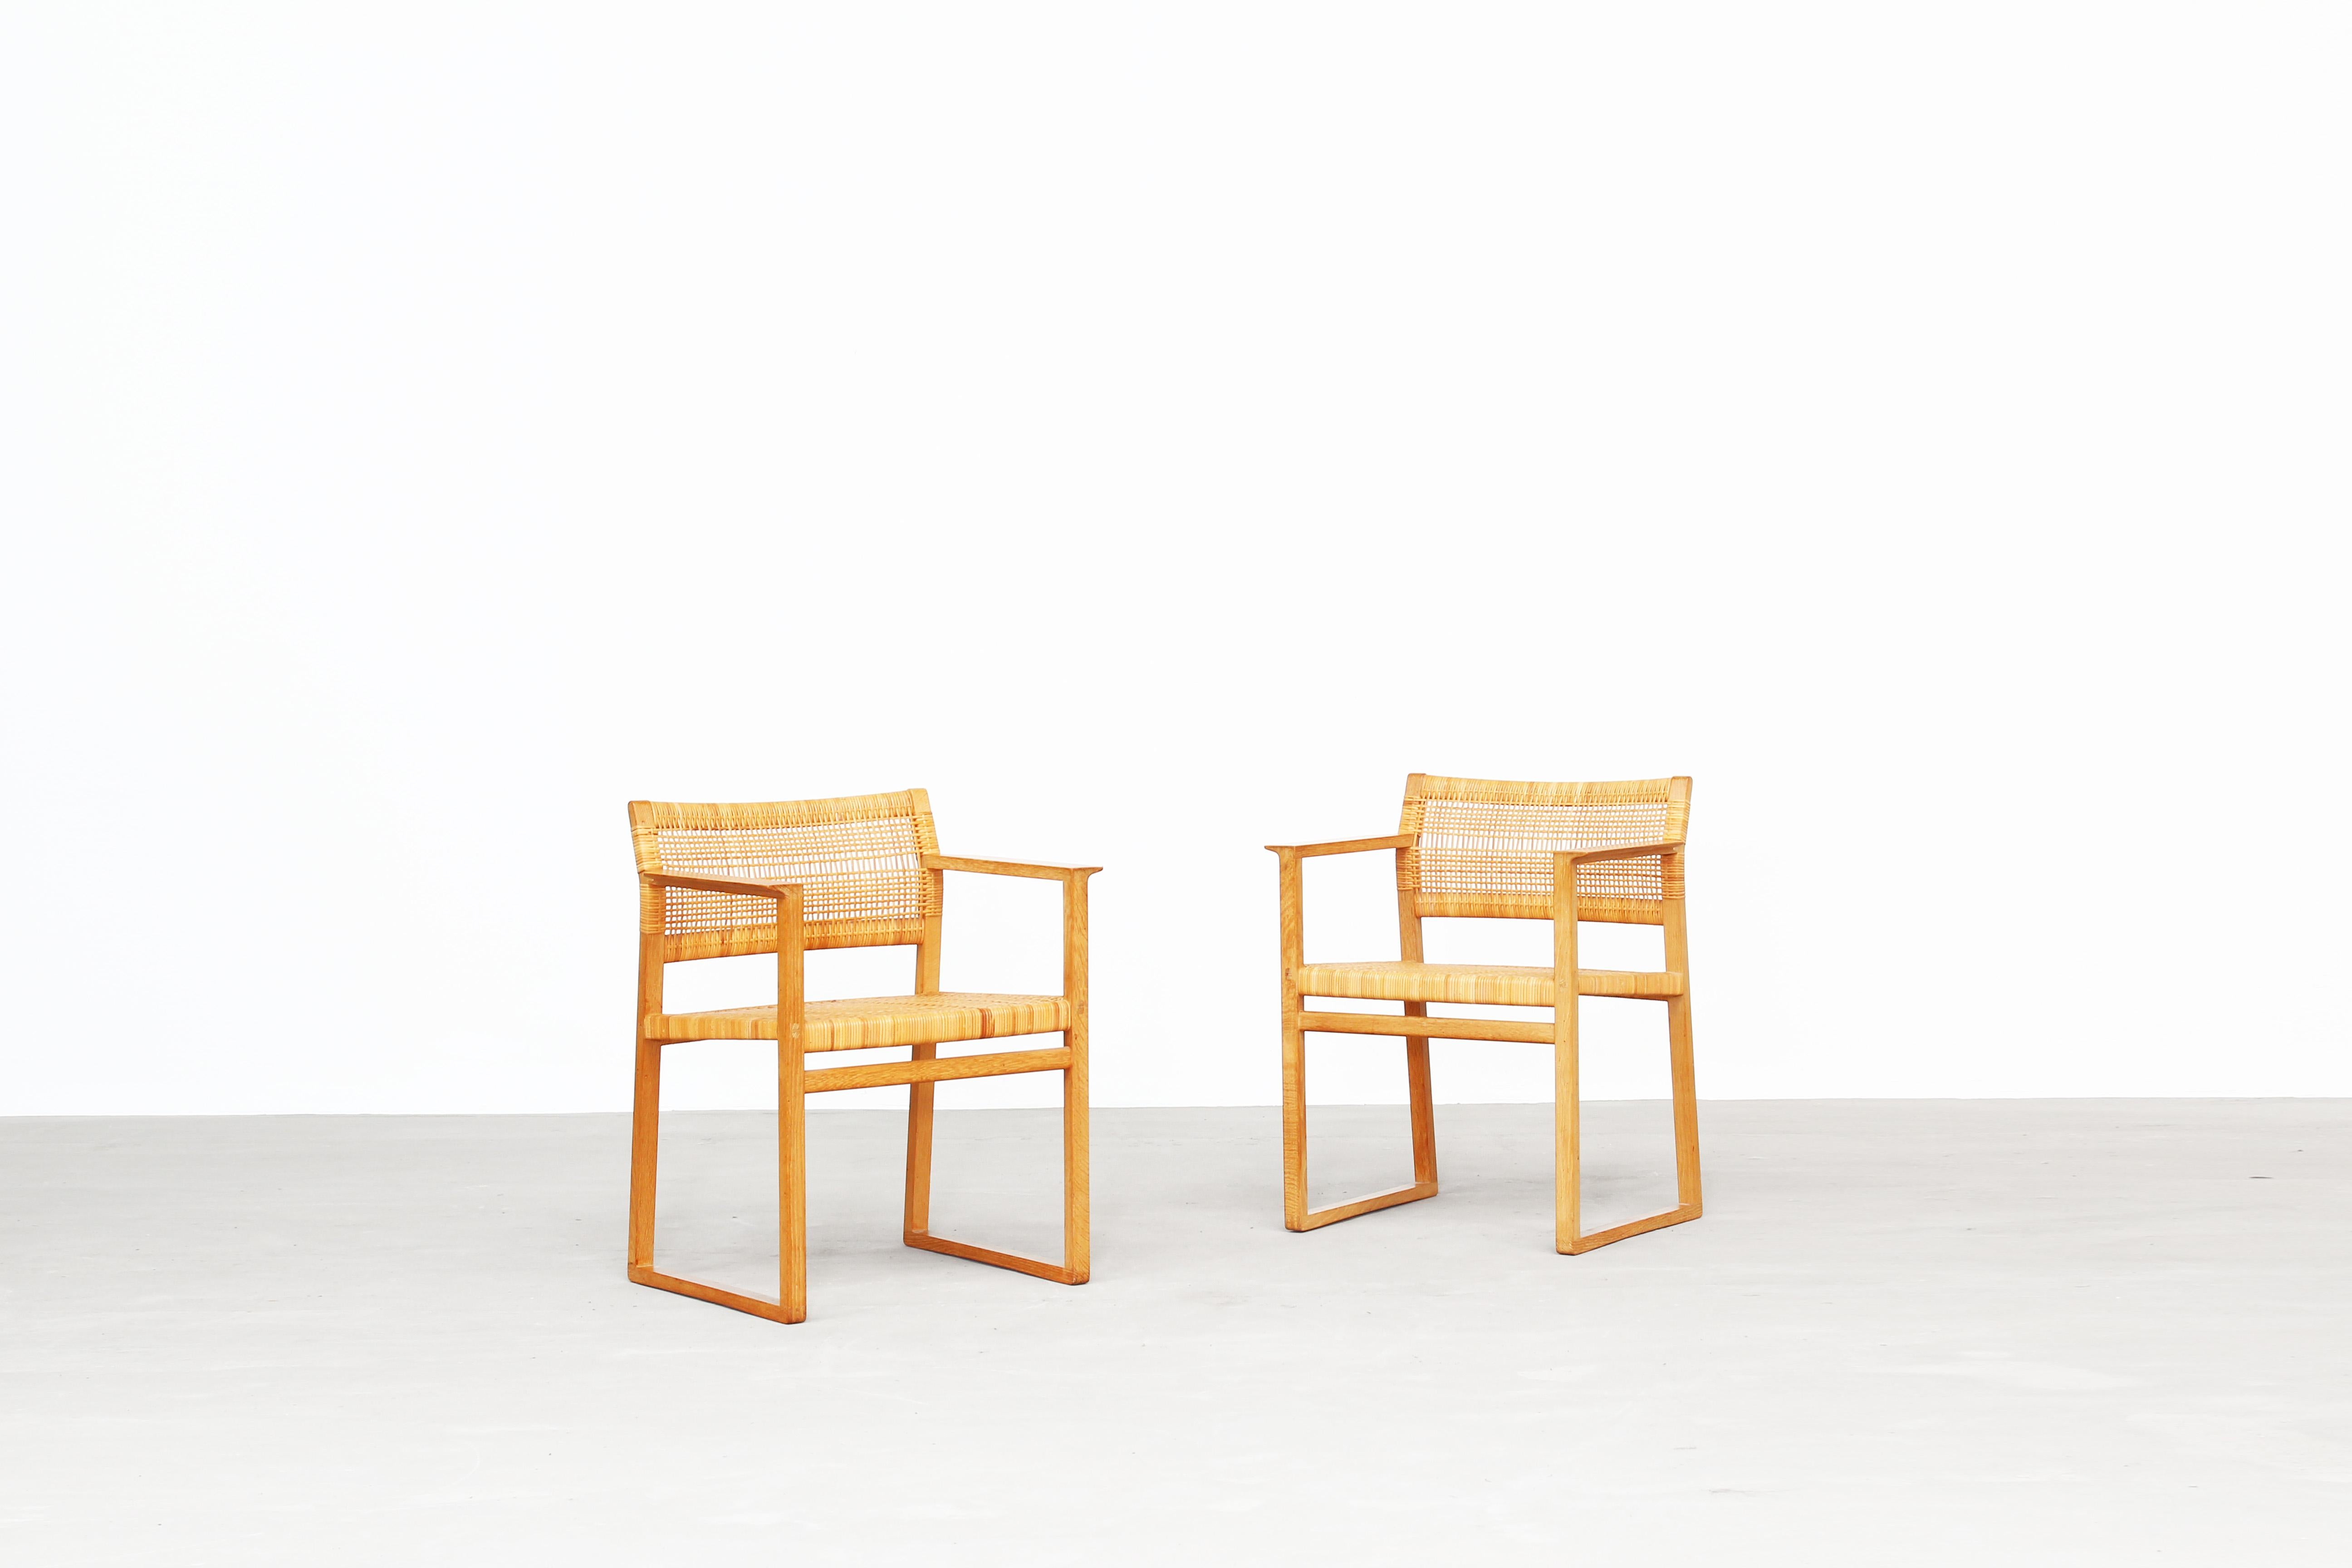 A very beautiful pair of dining chairs designed by Børge Mogensen for Fredericia Stolefabrik, Denmark. Both chairs are in a very good condition with just little traces of usage. The frame made out of oak comes in a great patina. The cane is still in